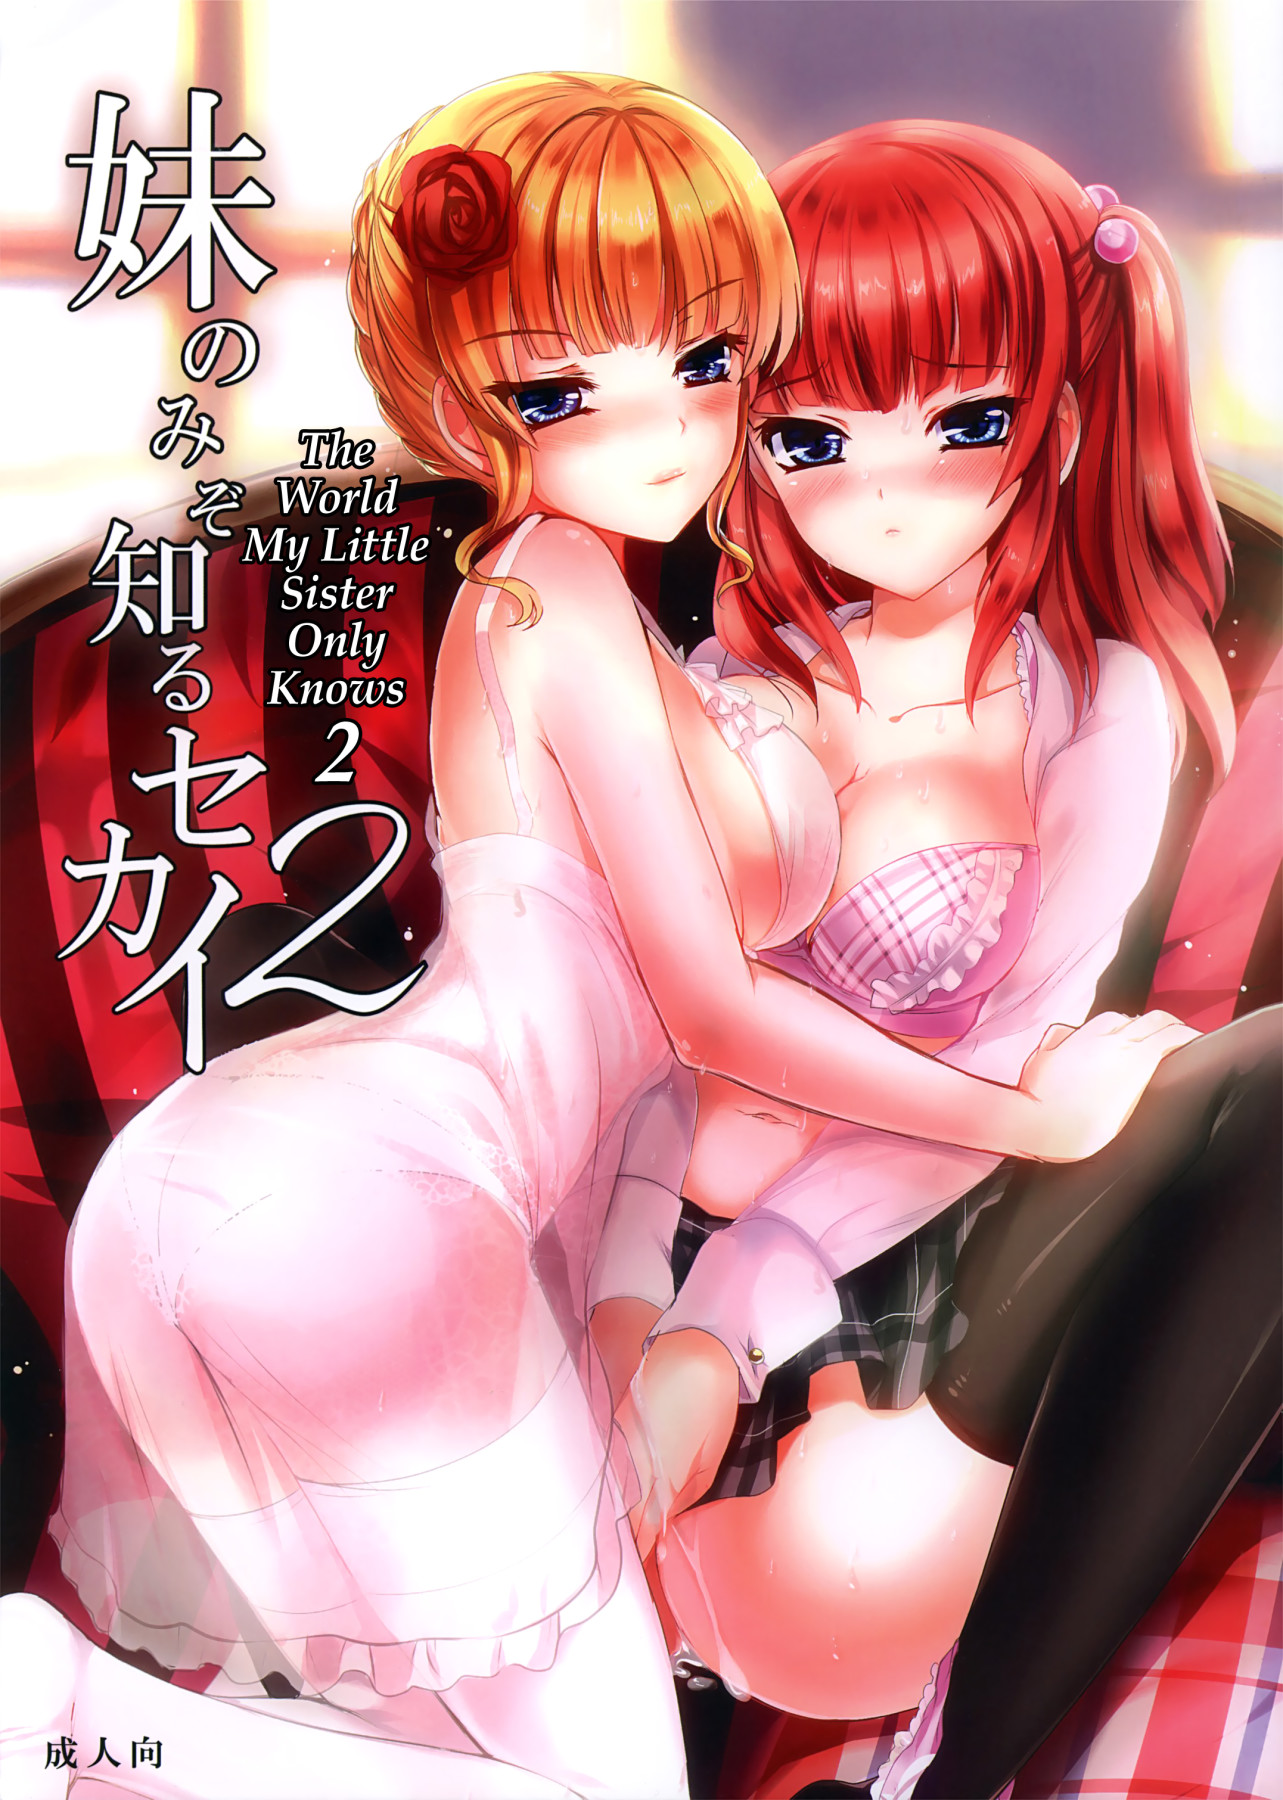 Hentai Manga Comic-The World My Little Sister Only Knows 2-Read-1